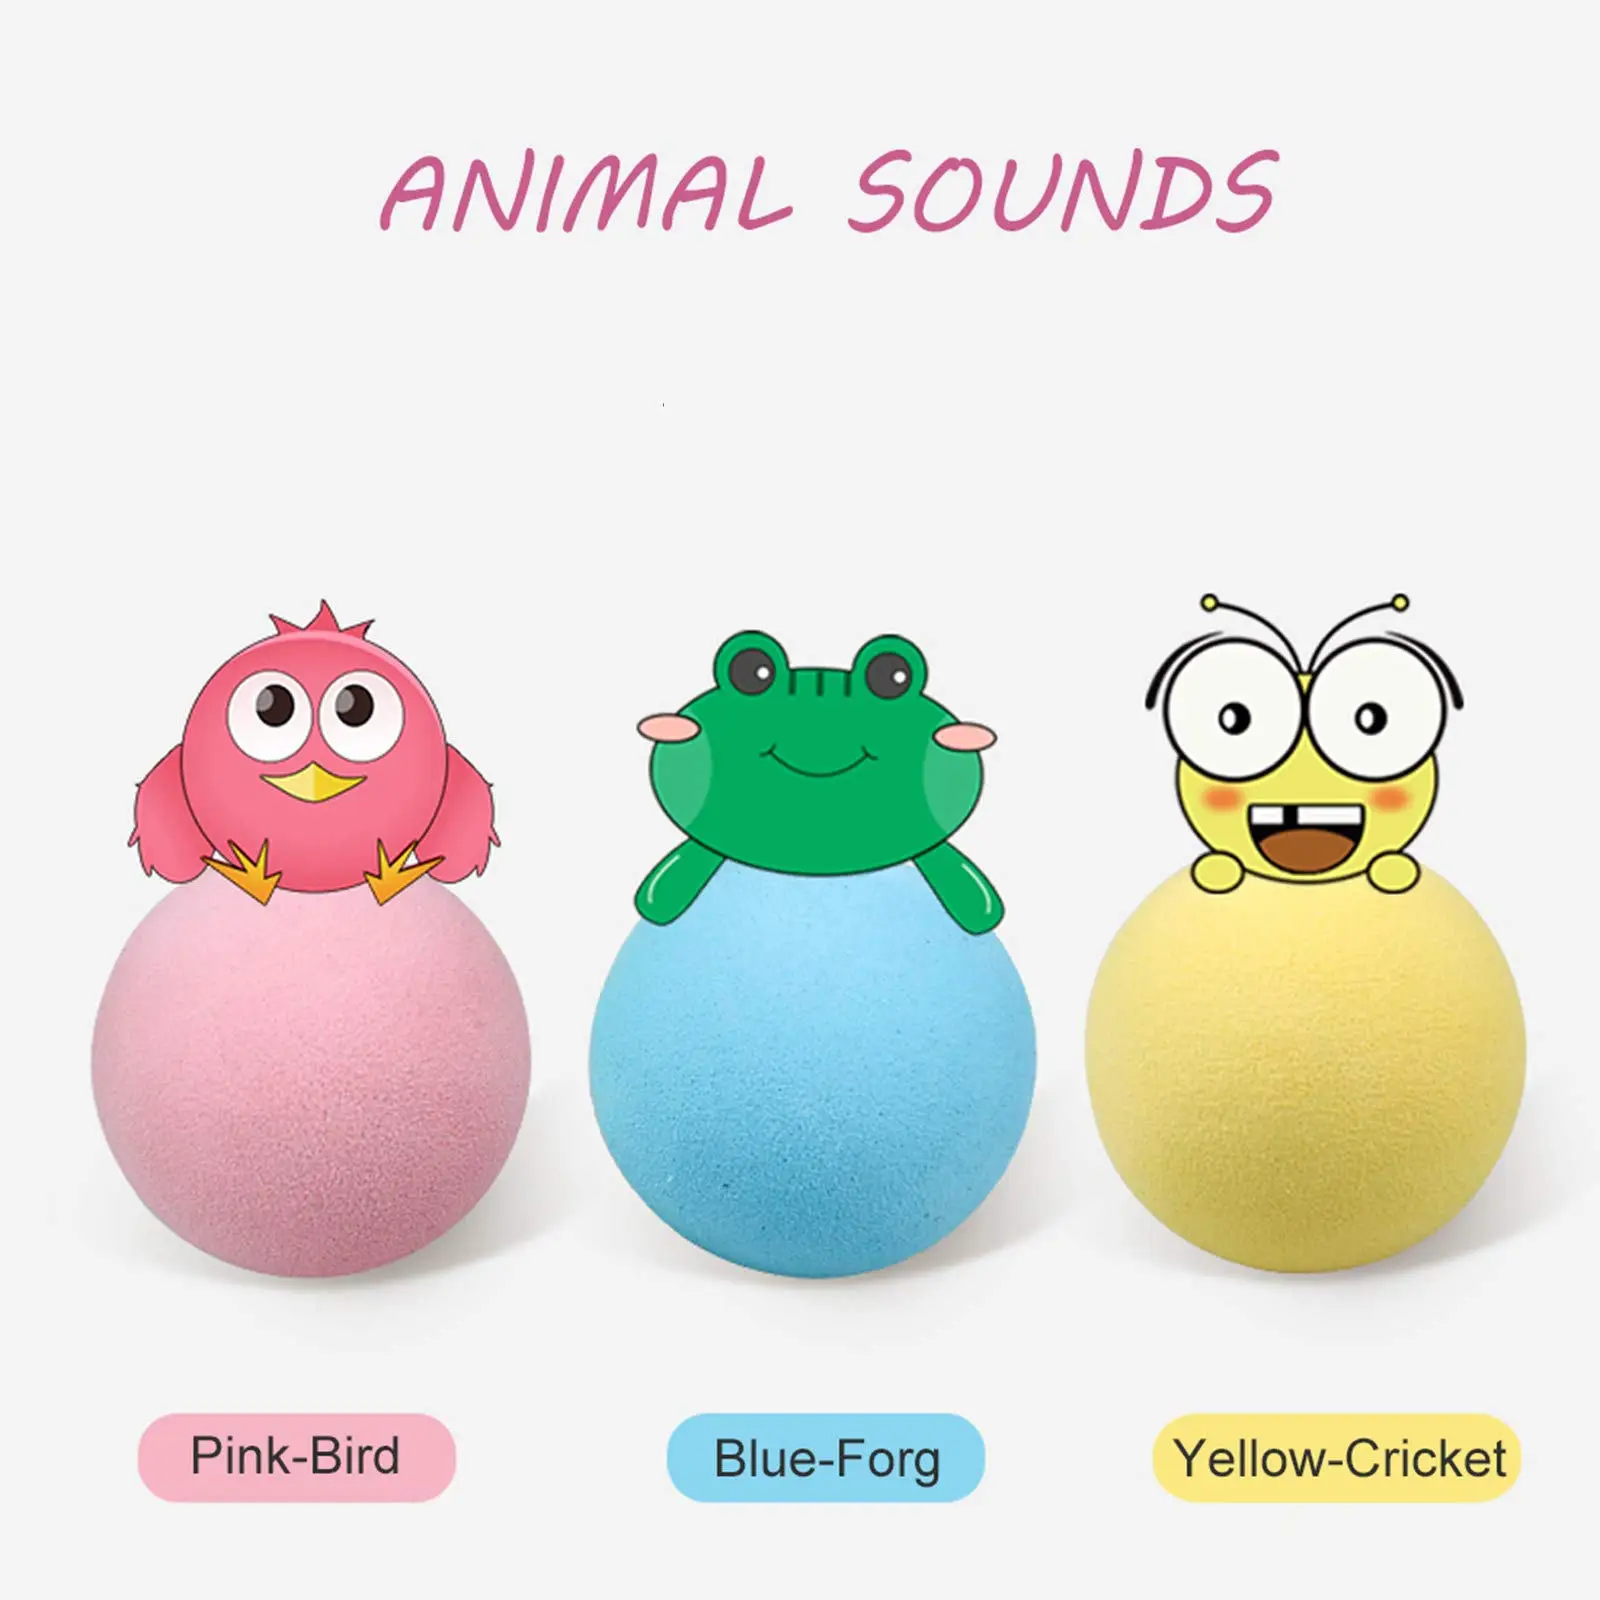 Smart Cat Toys Interactive Ball Catnip Cat Training Toy Pet Playing Ball Pet Squeaky Supplies Products Toy for Cats Kitten Kitty